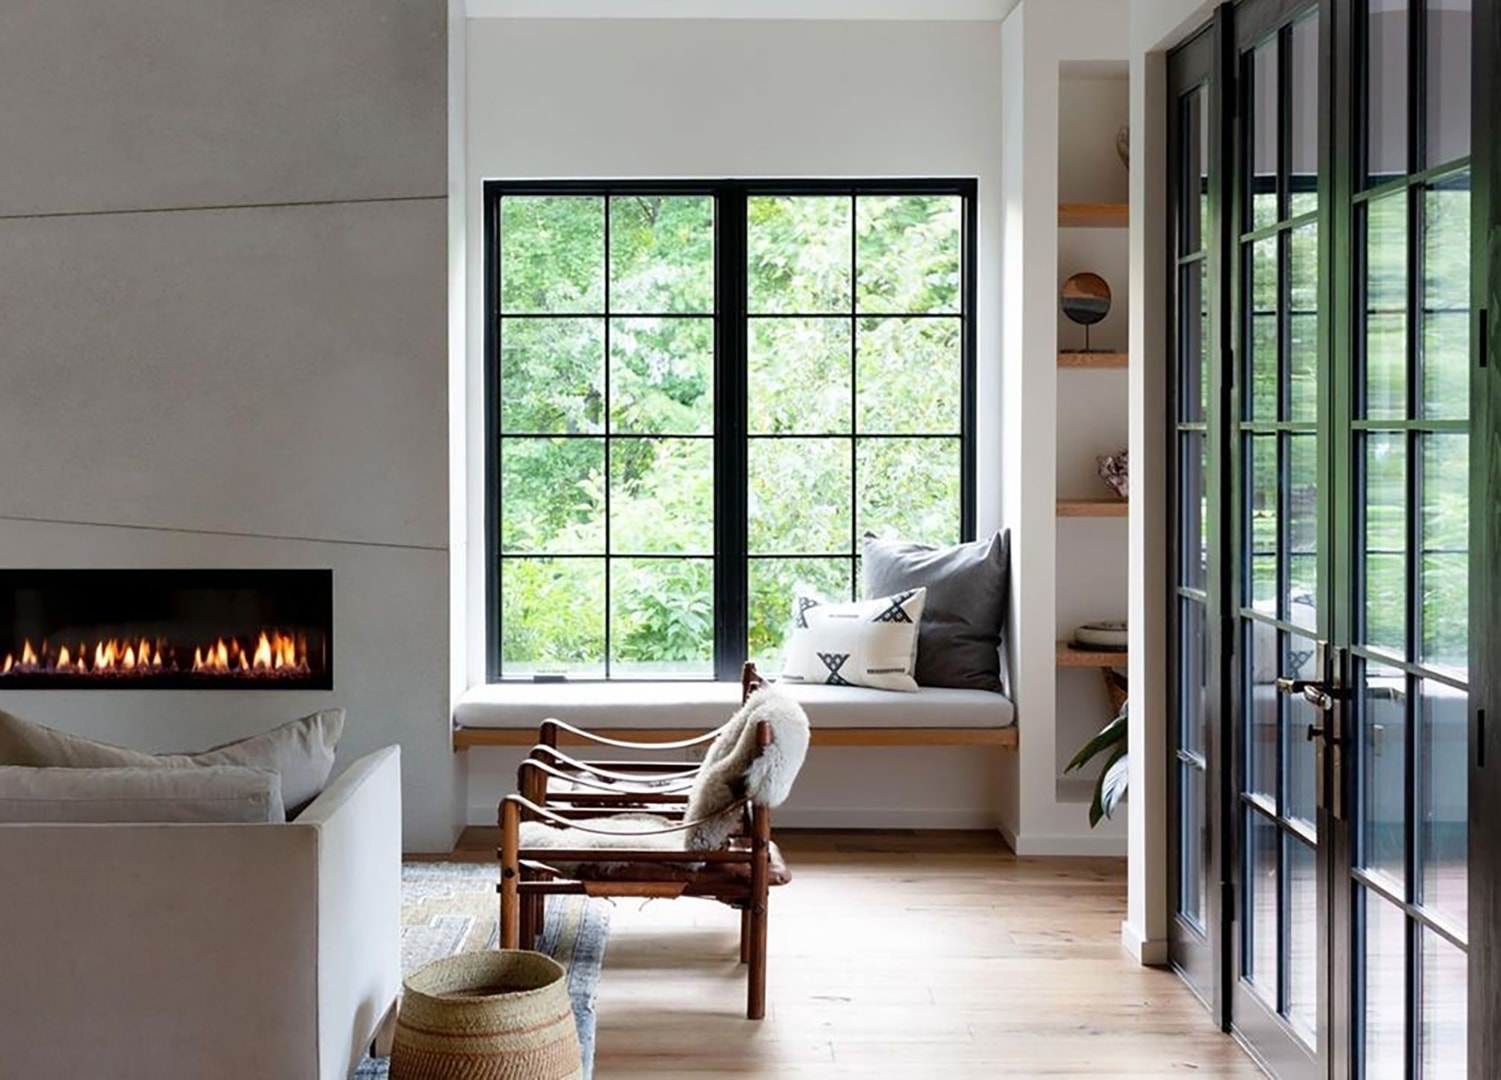 Two black casement windows open the living room to fresh air and offer seating area to warm up by the fireplace.